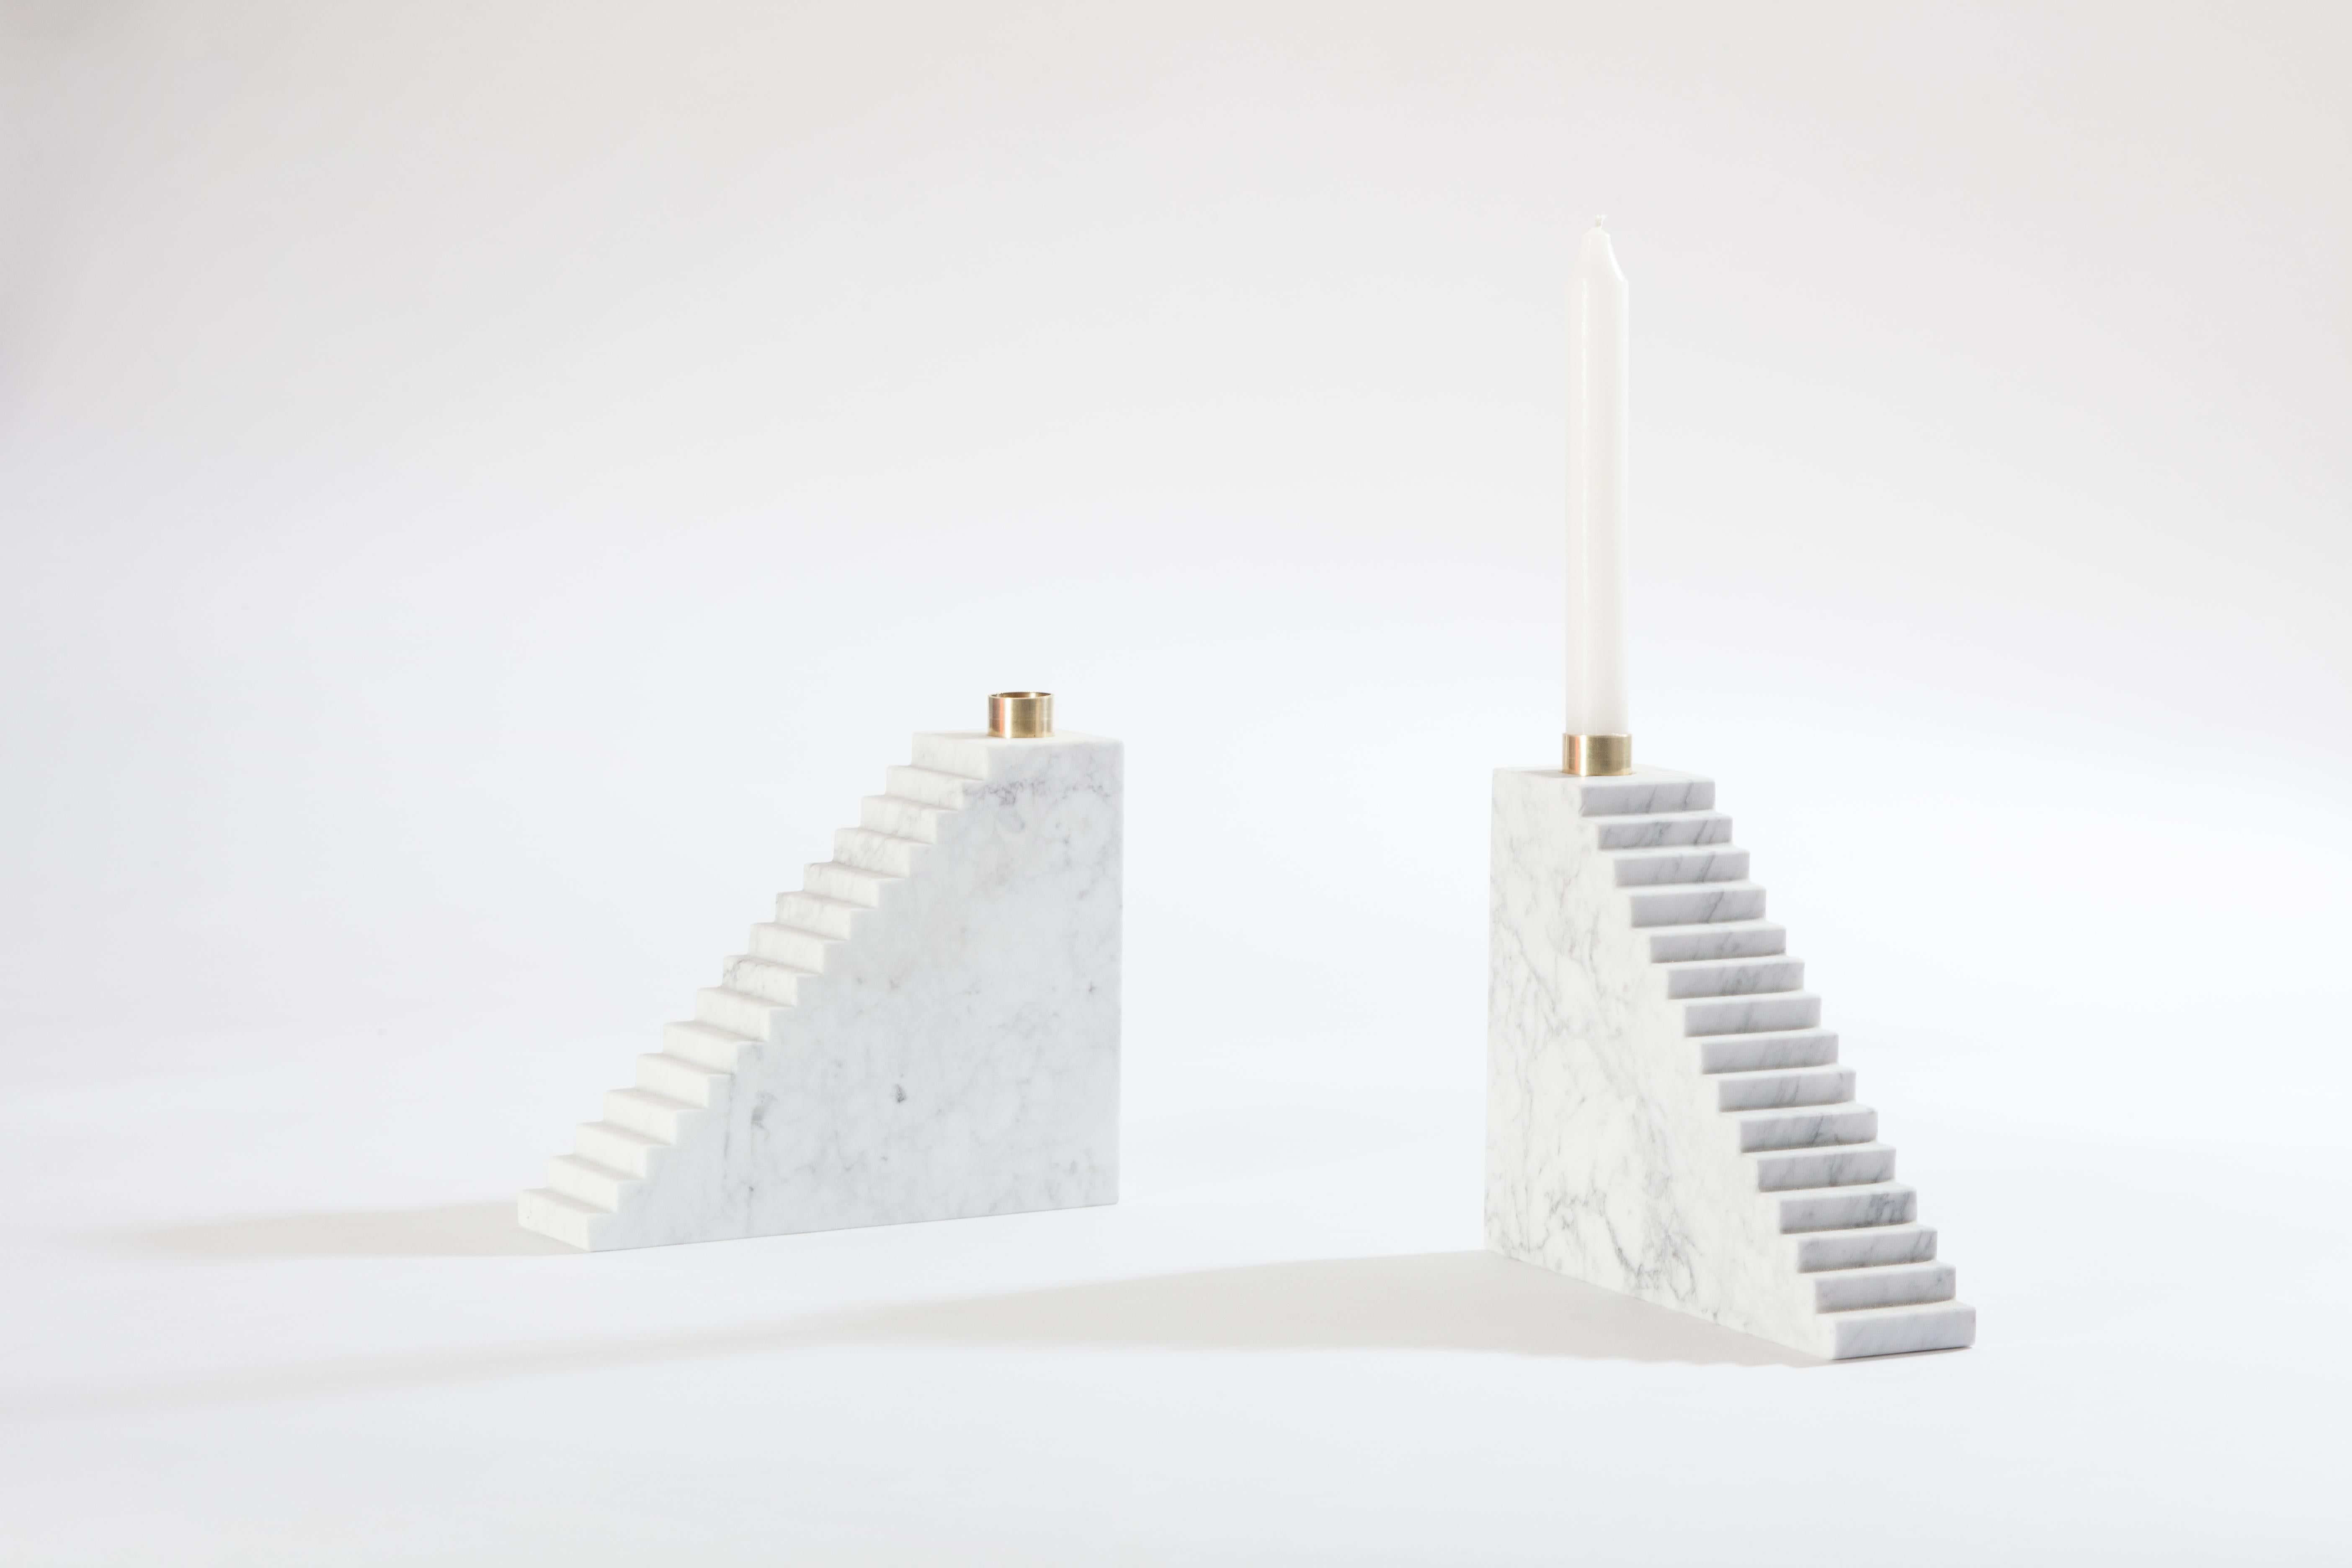 Set of 2 marble stairs by Joseph Vila Capdevila
Material: Carrara marble, brass
Dimensions: 15 x 20.5 x 5 cm
Weight: 2.5 kg

Aparentment is a space for creation and innovation, experimenting with materials with the goal to develop robust,